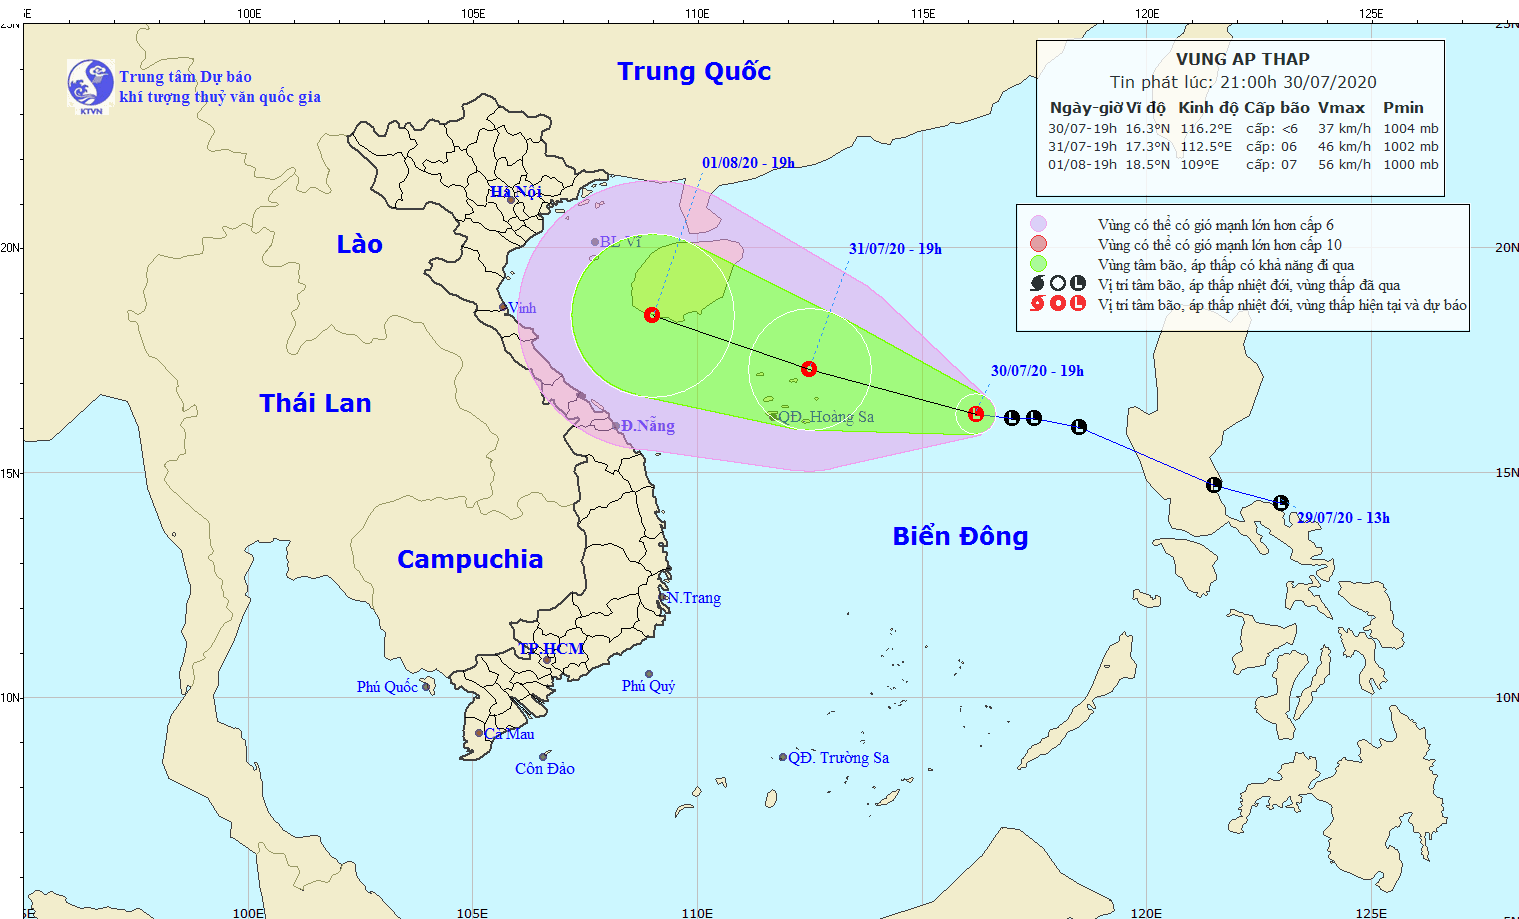 vietnam weather august 1 tropical depression to become storm bringing heavy rains across country